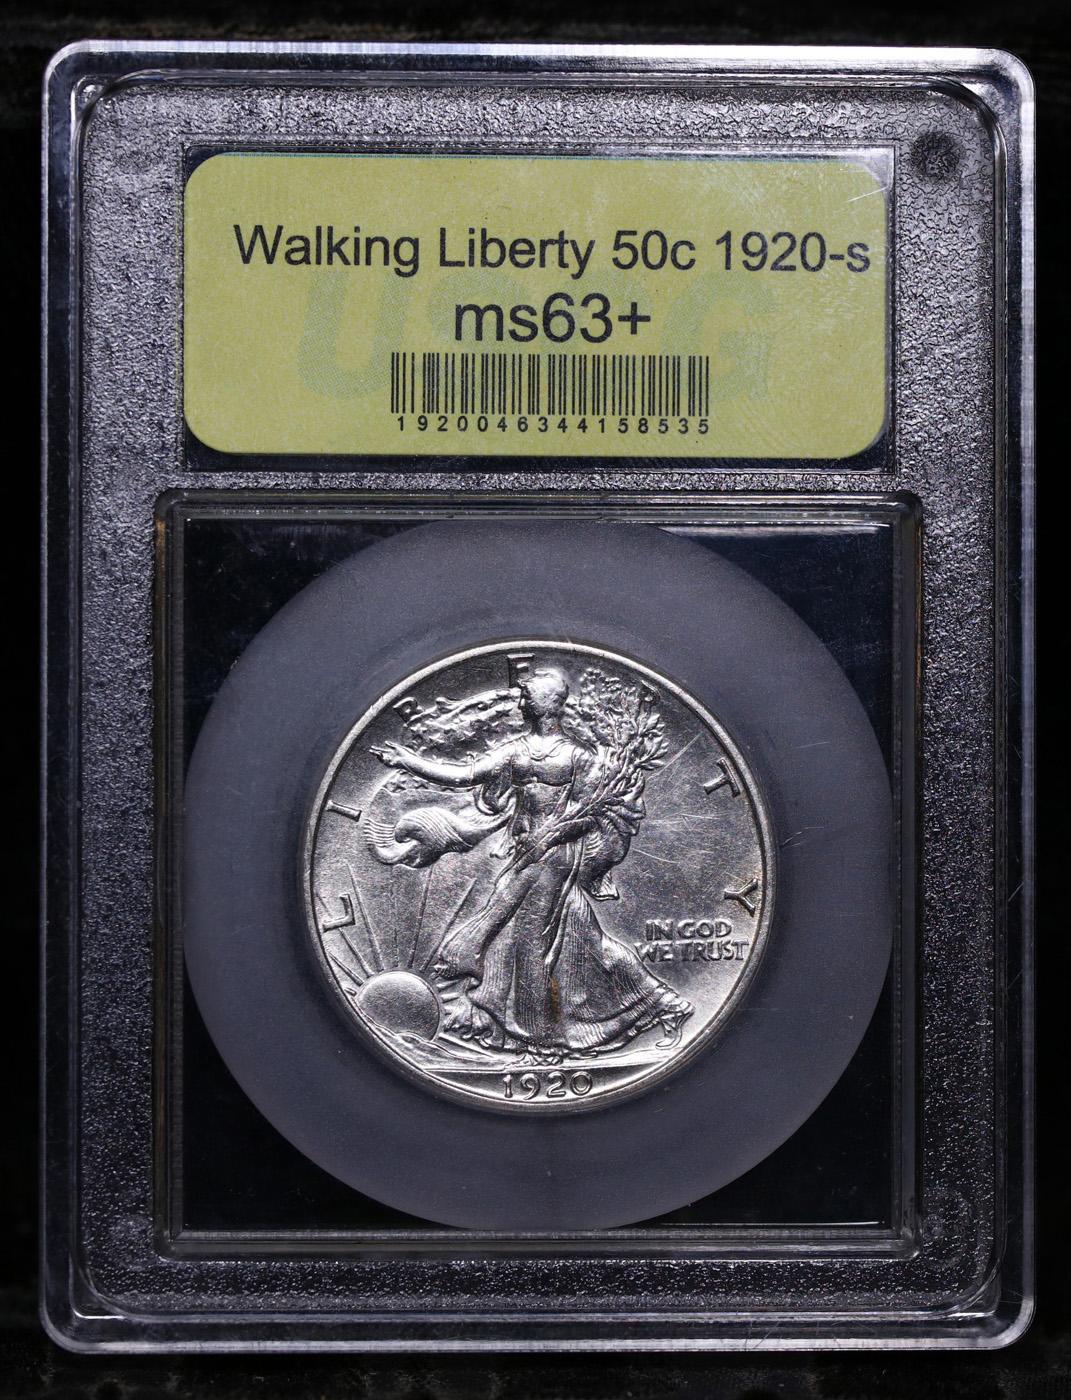 ***Auction Highlight*** 1920-s Walking Liberty Half Dollar 50c Graded Select+ Unc BY USCG (fc)